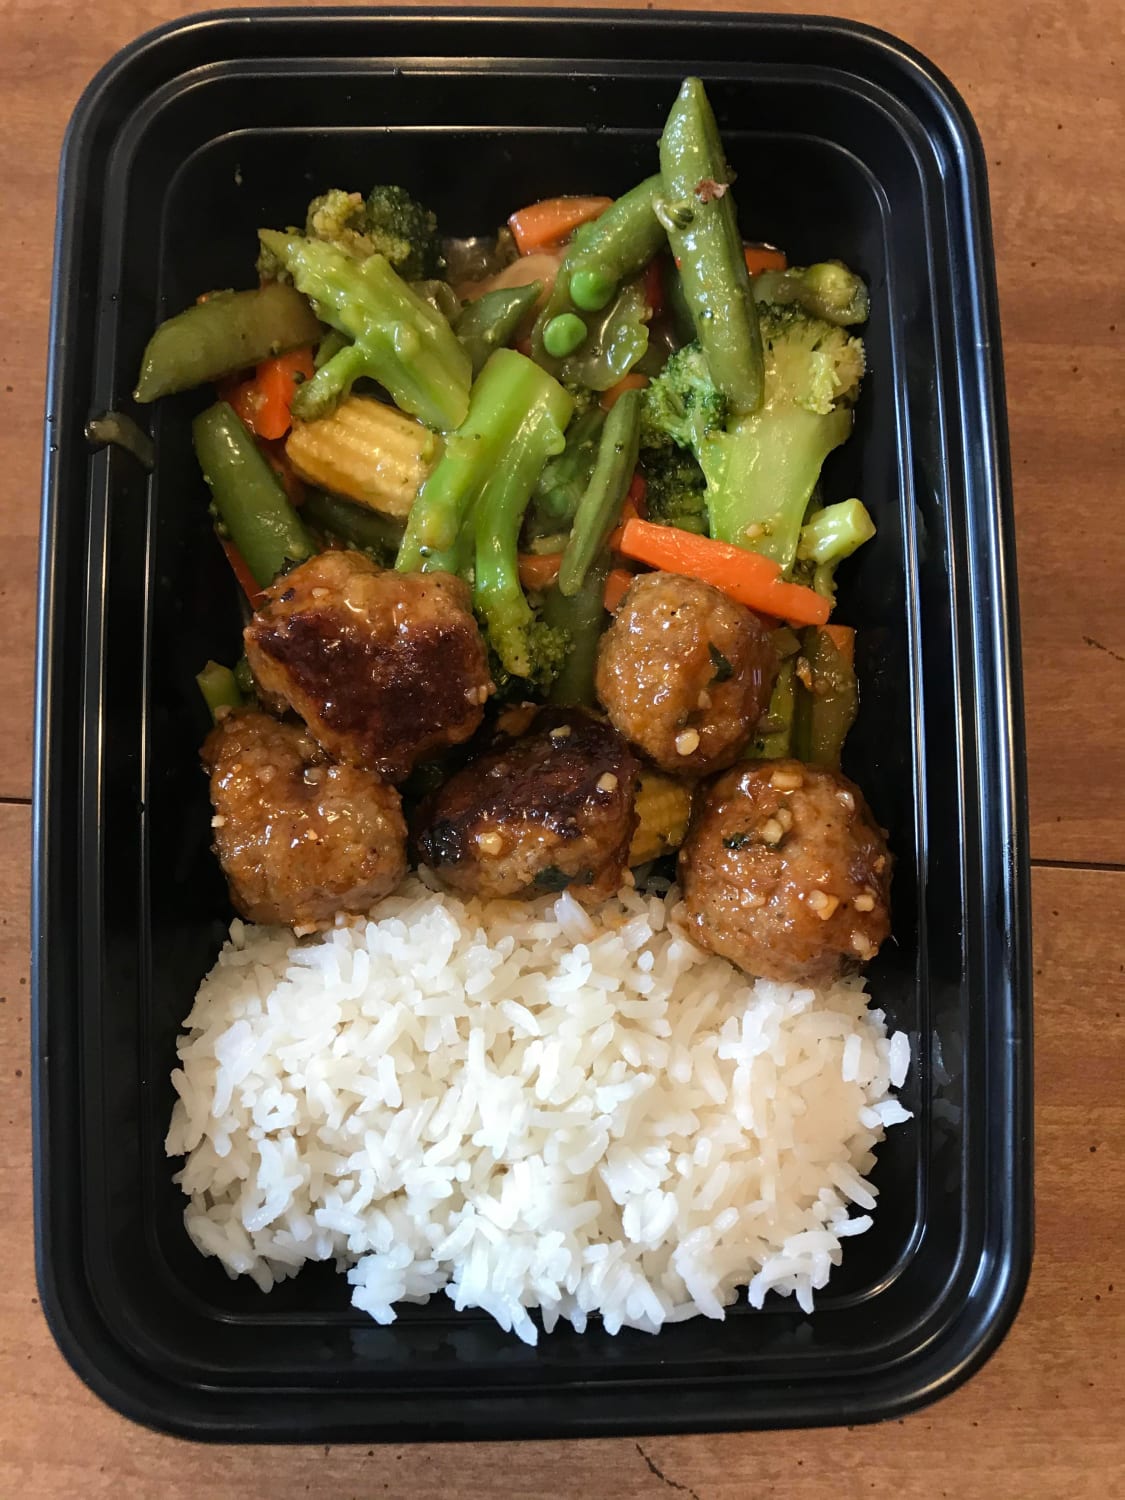 Honey Sriracha glazed meatballs with rice and stir fried veggies! Sweet and spicy!